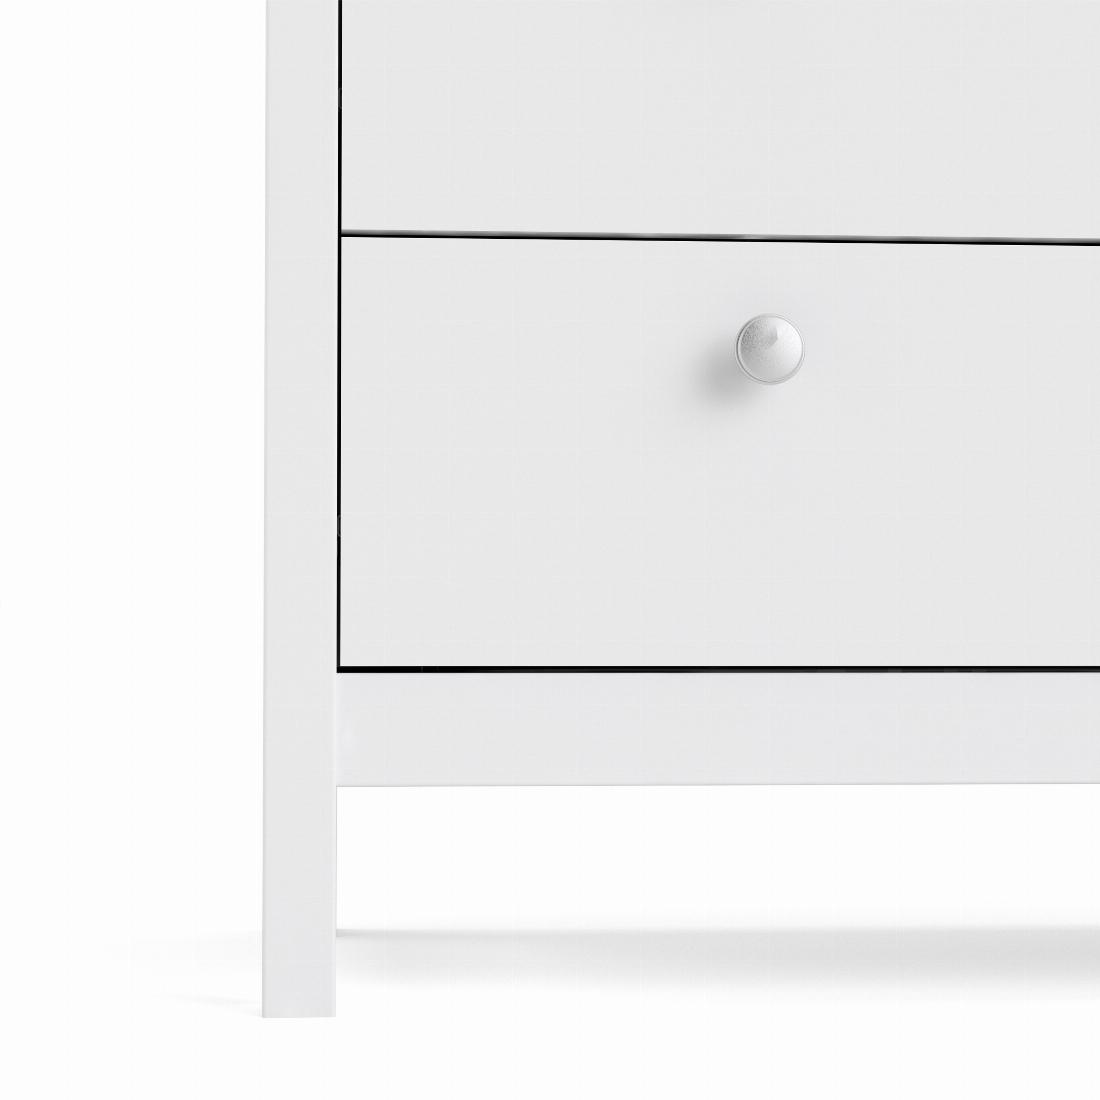 Madrid Chest 3+2 drawers in White